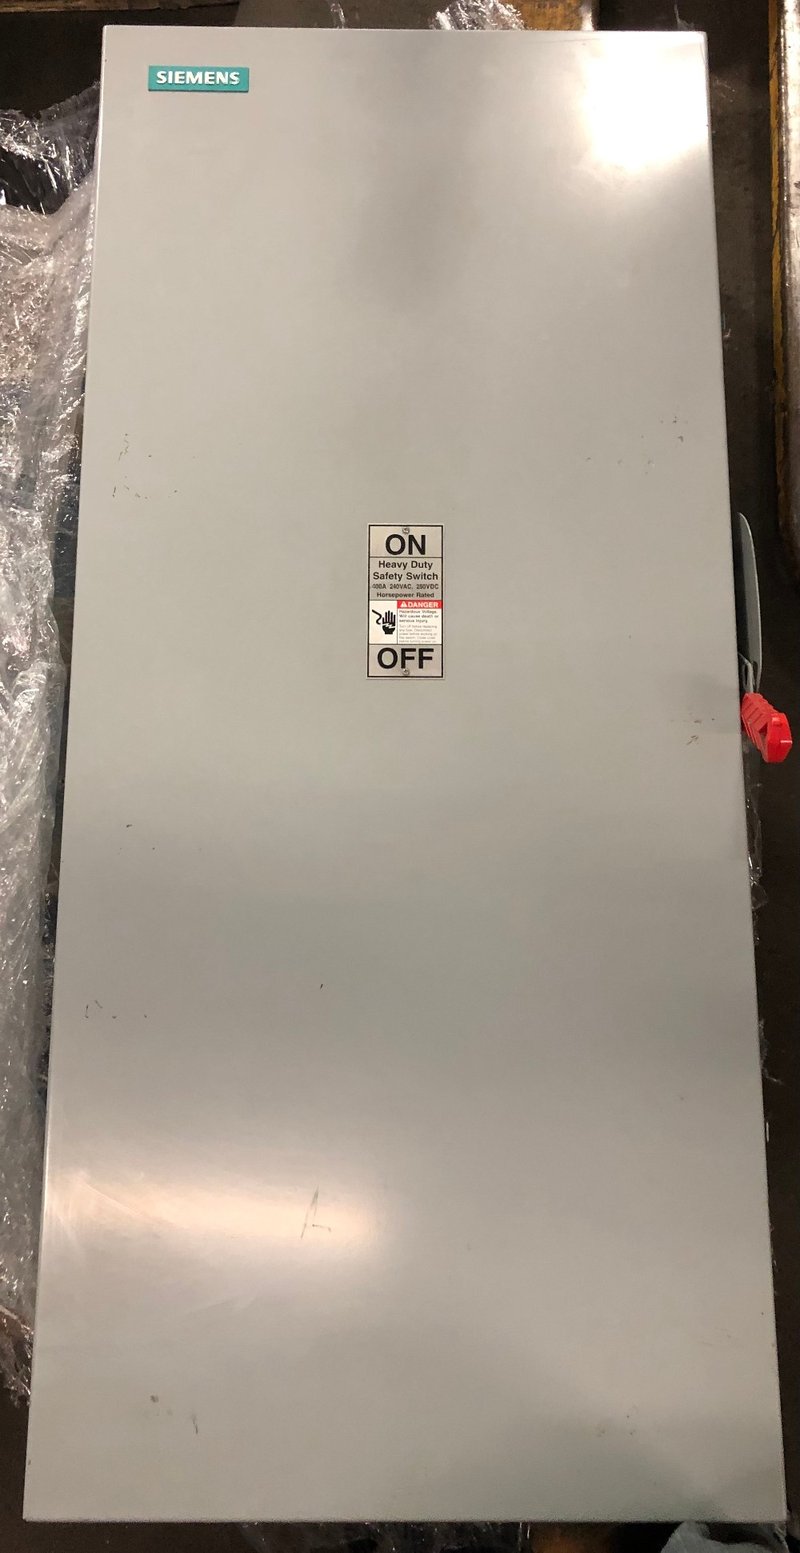 400 Amp. Siemens, HF325N, 3 pole, 240 Volts fusible